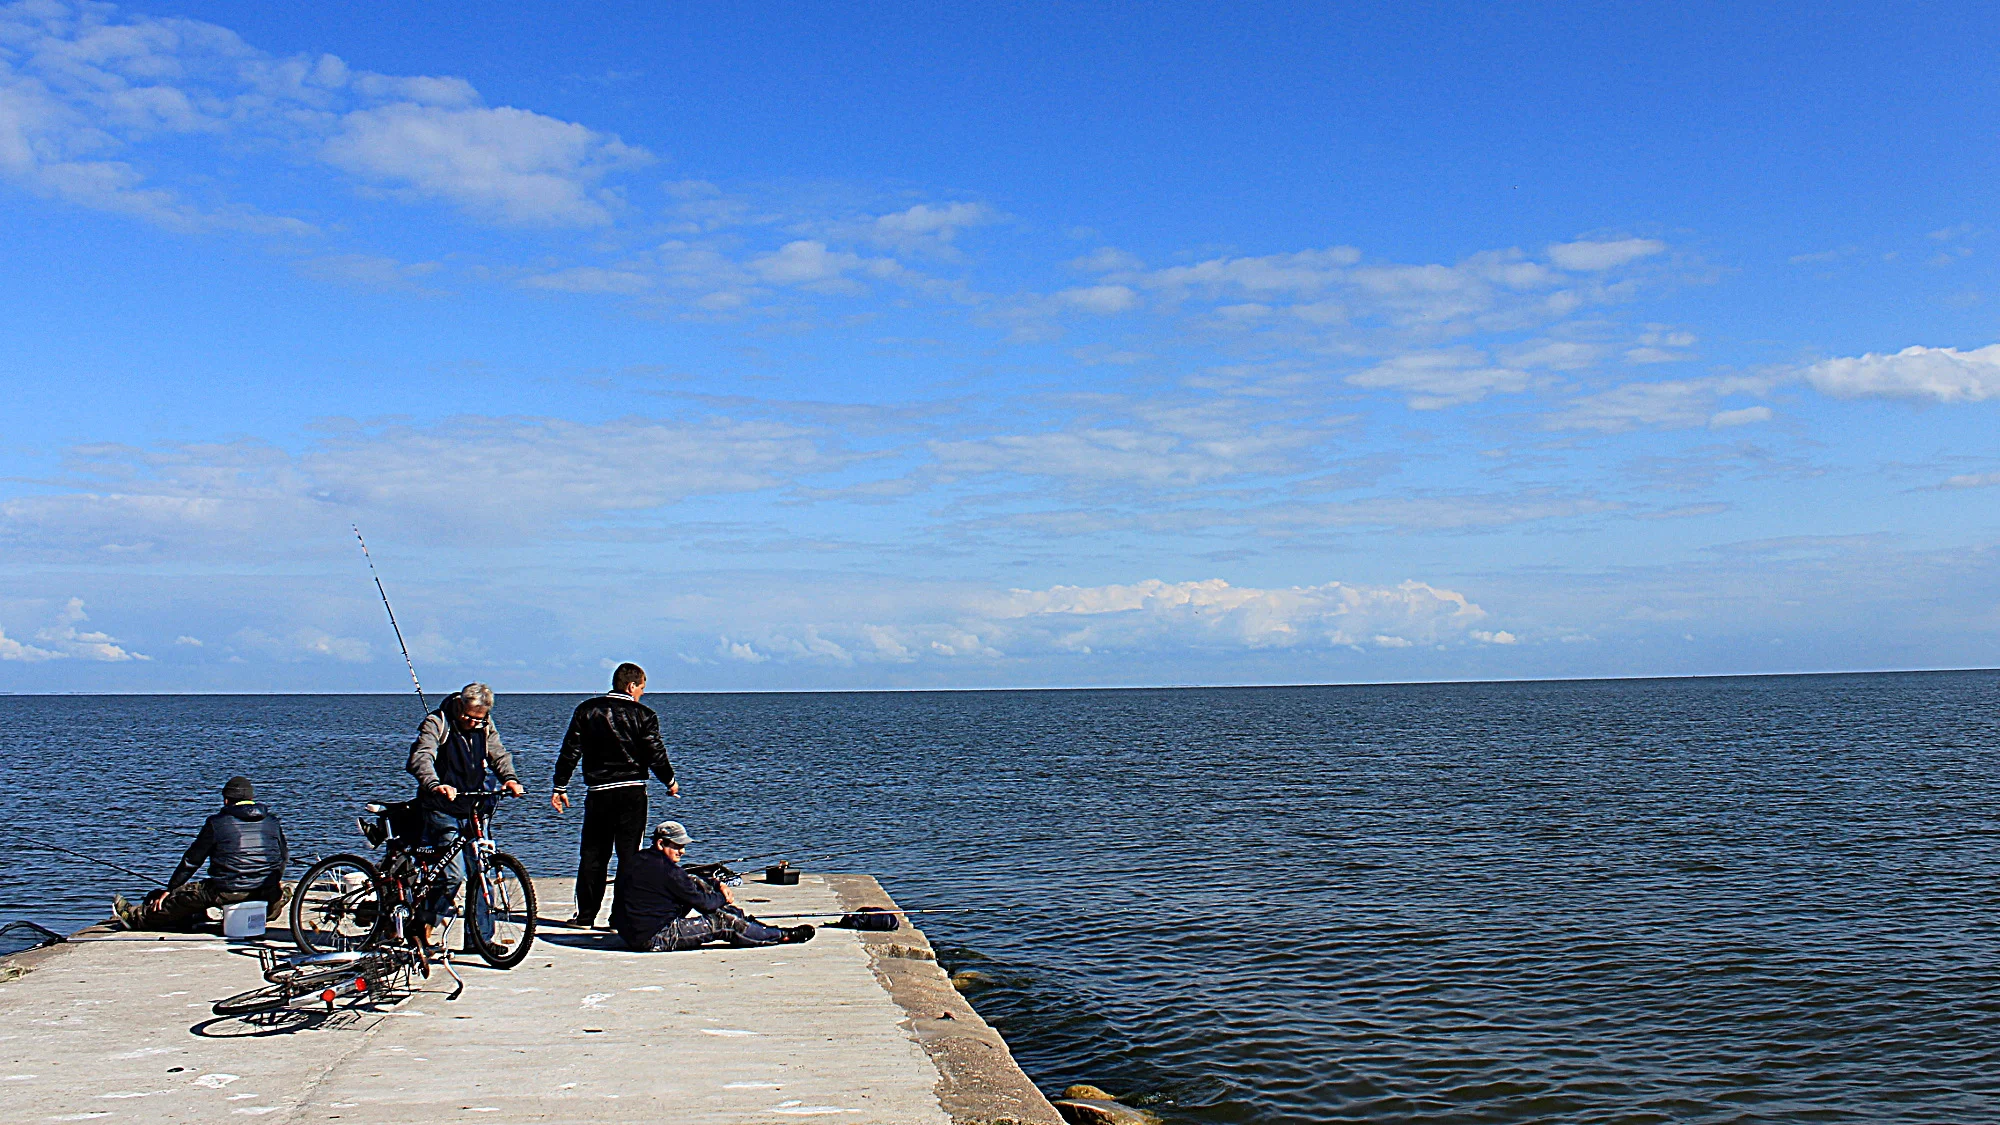 Four fishermen at the end of a dock by the Baltic Sea with blue sky in Lithuaia.